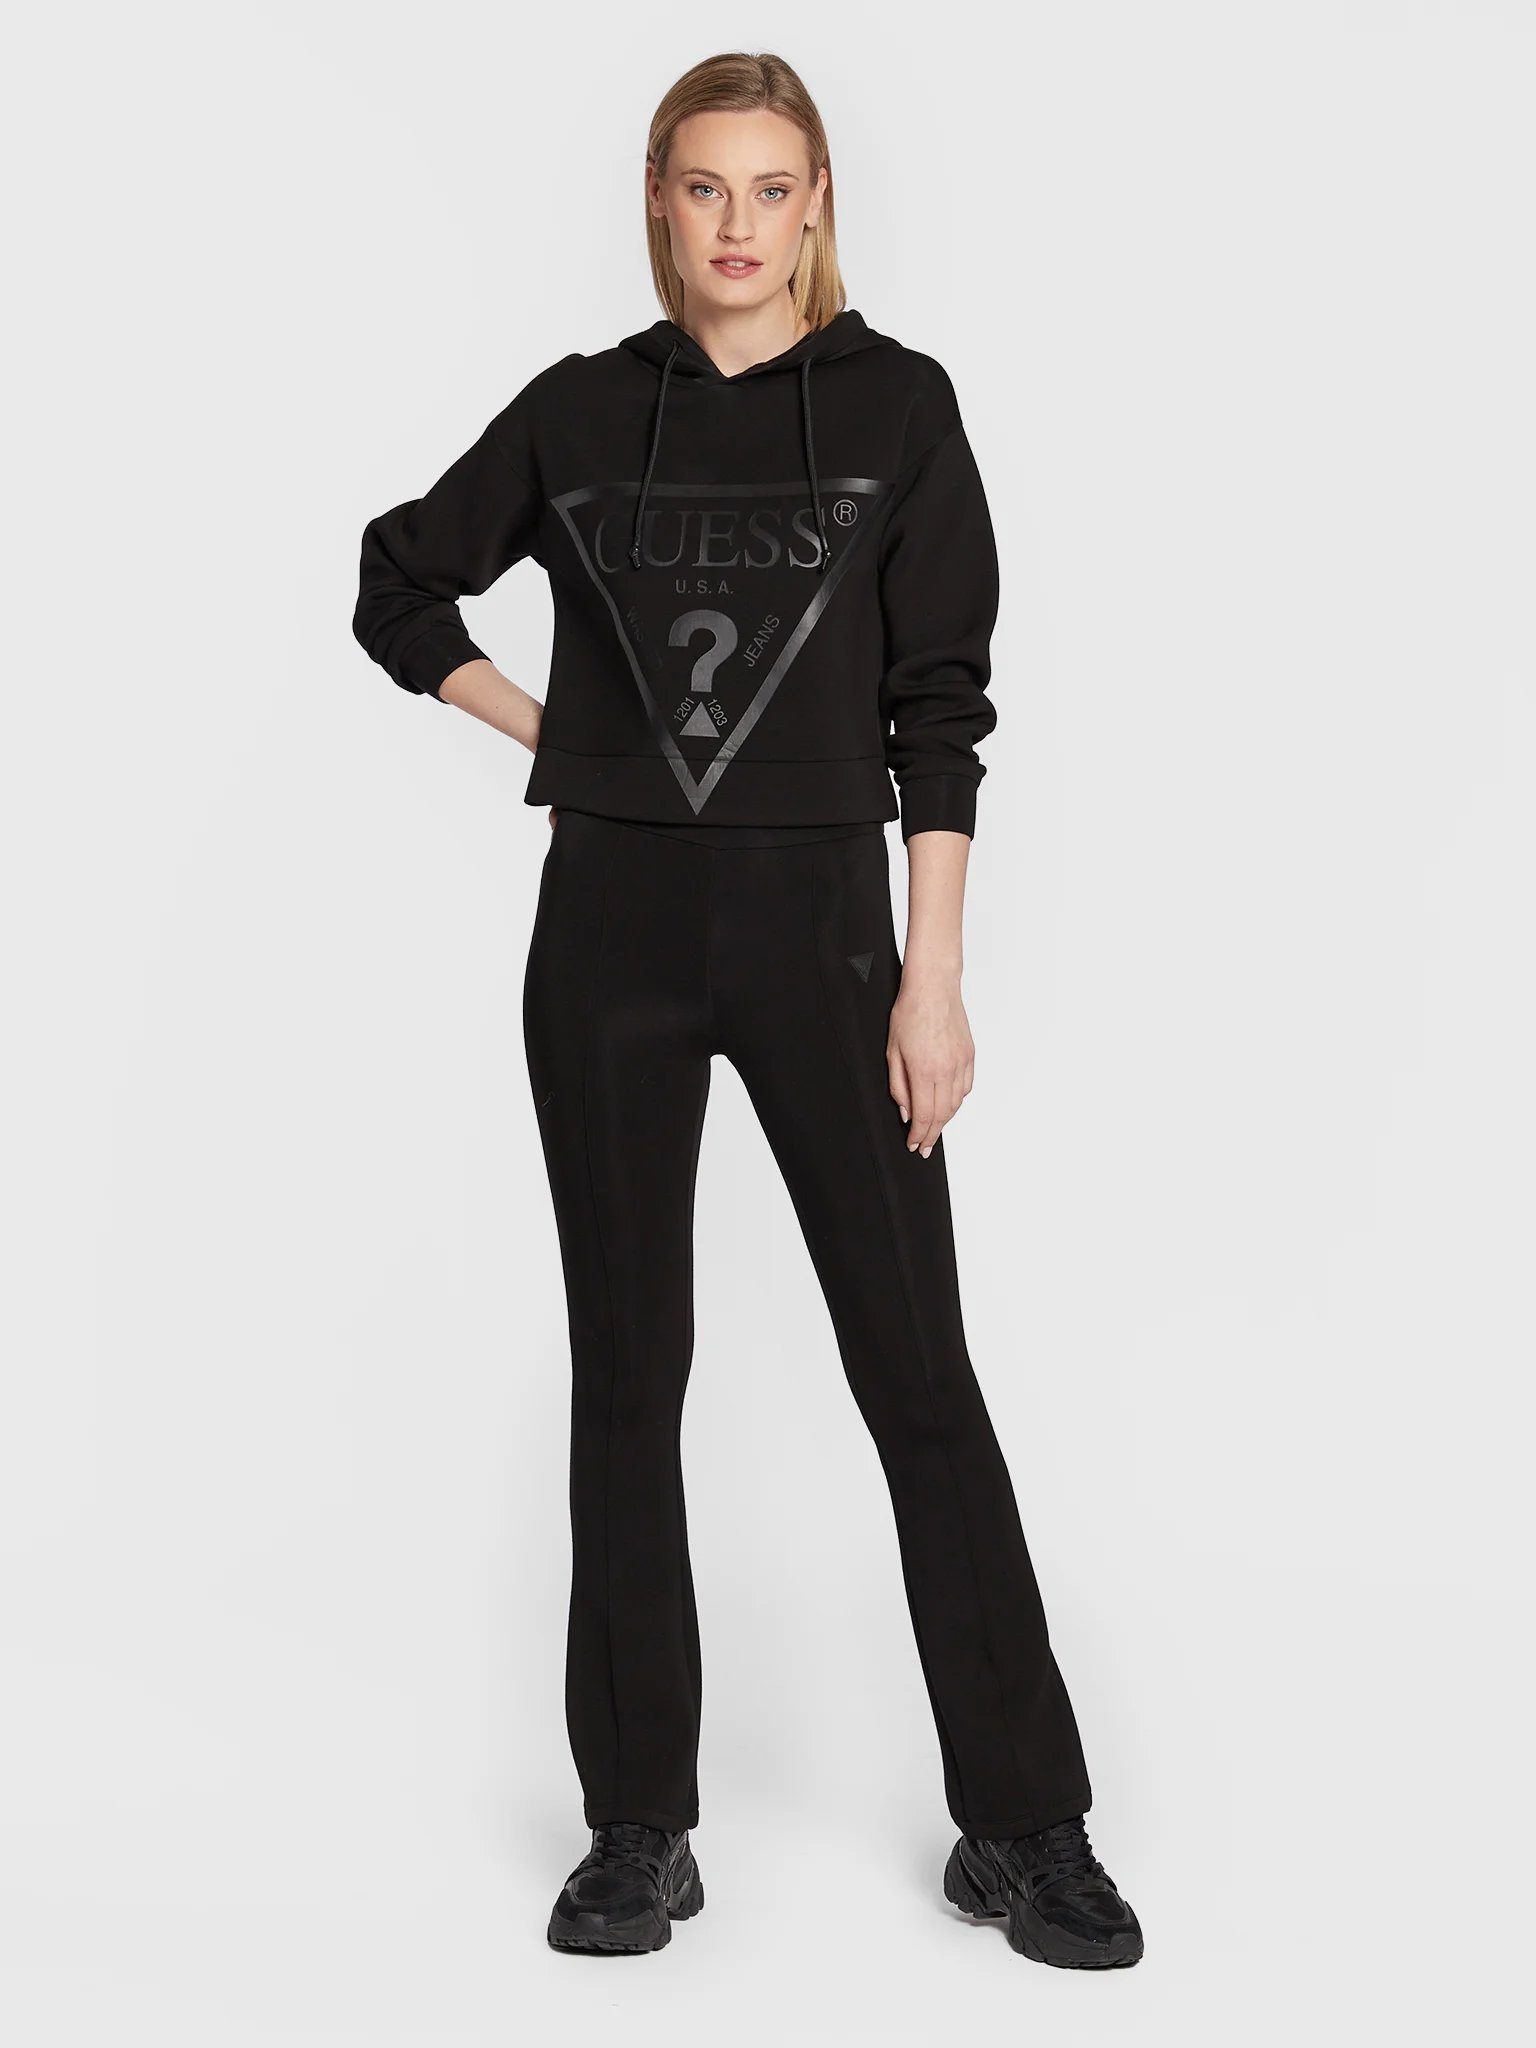 Guess Collection Sweatshirt Jet A996 Black